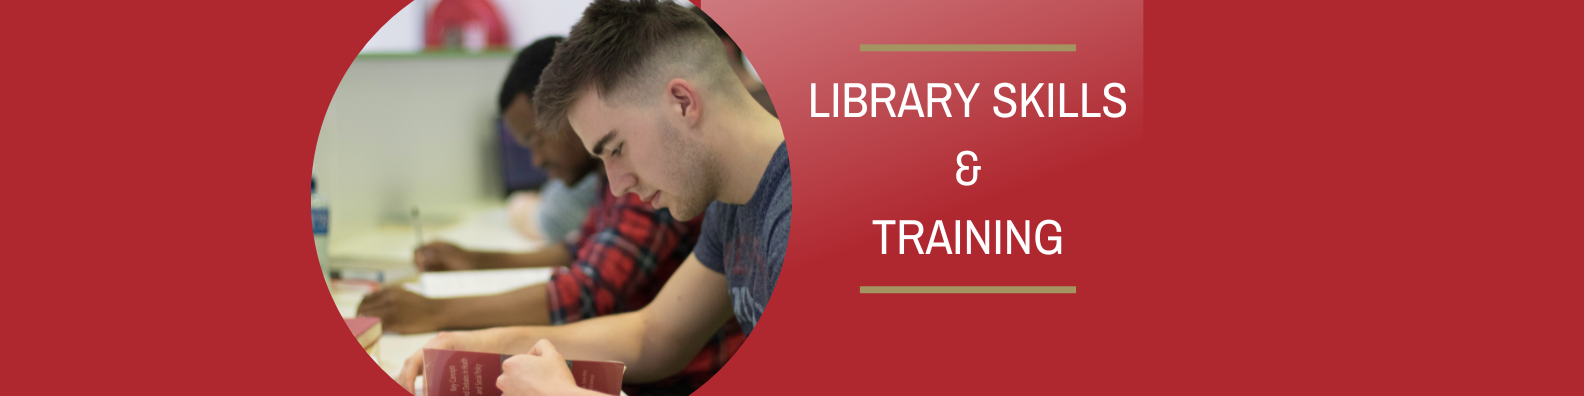 Library skills and training